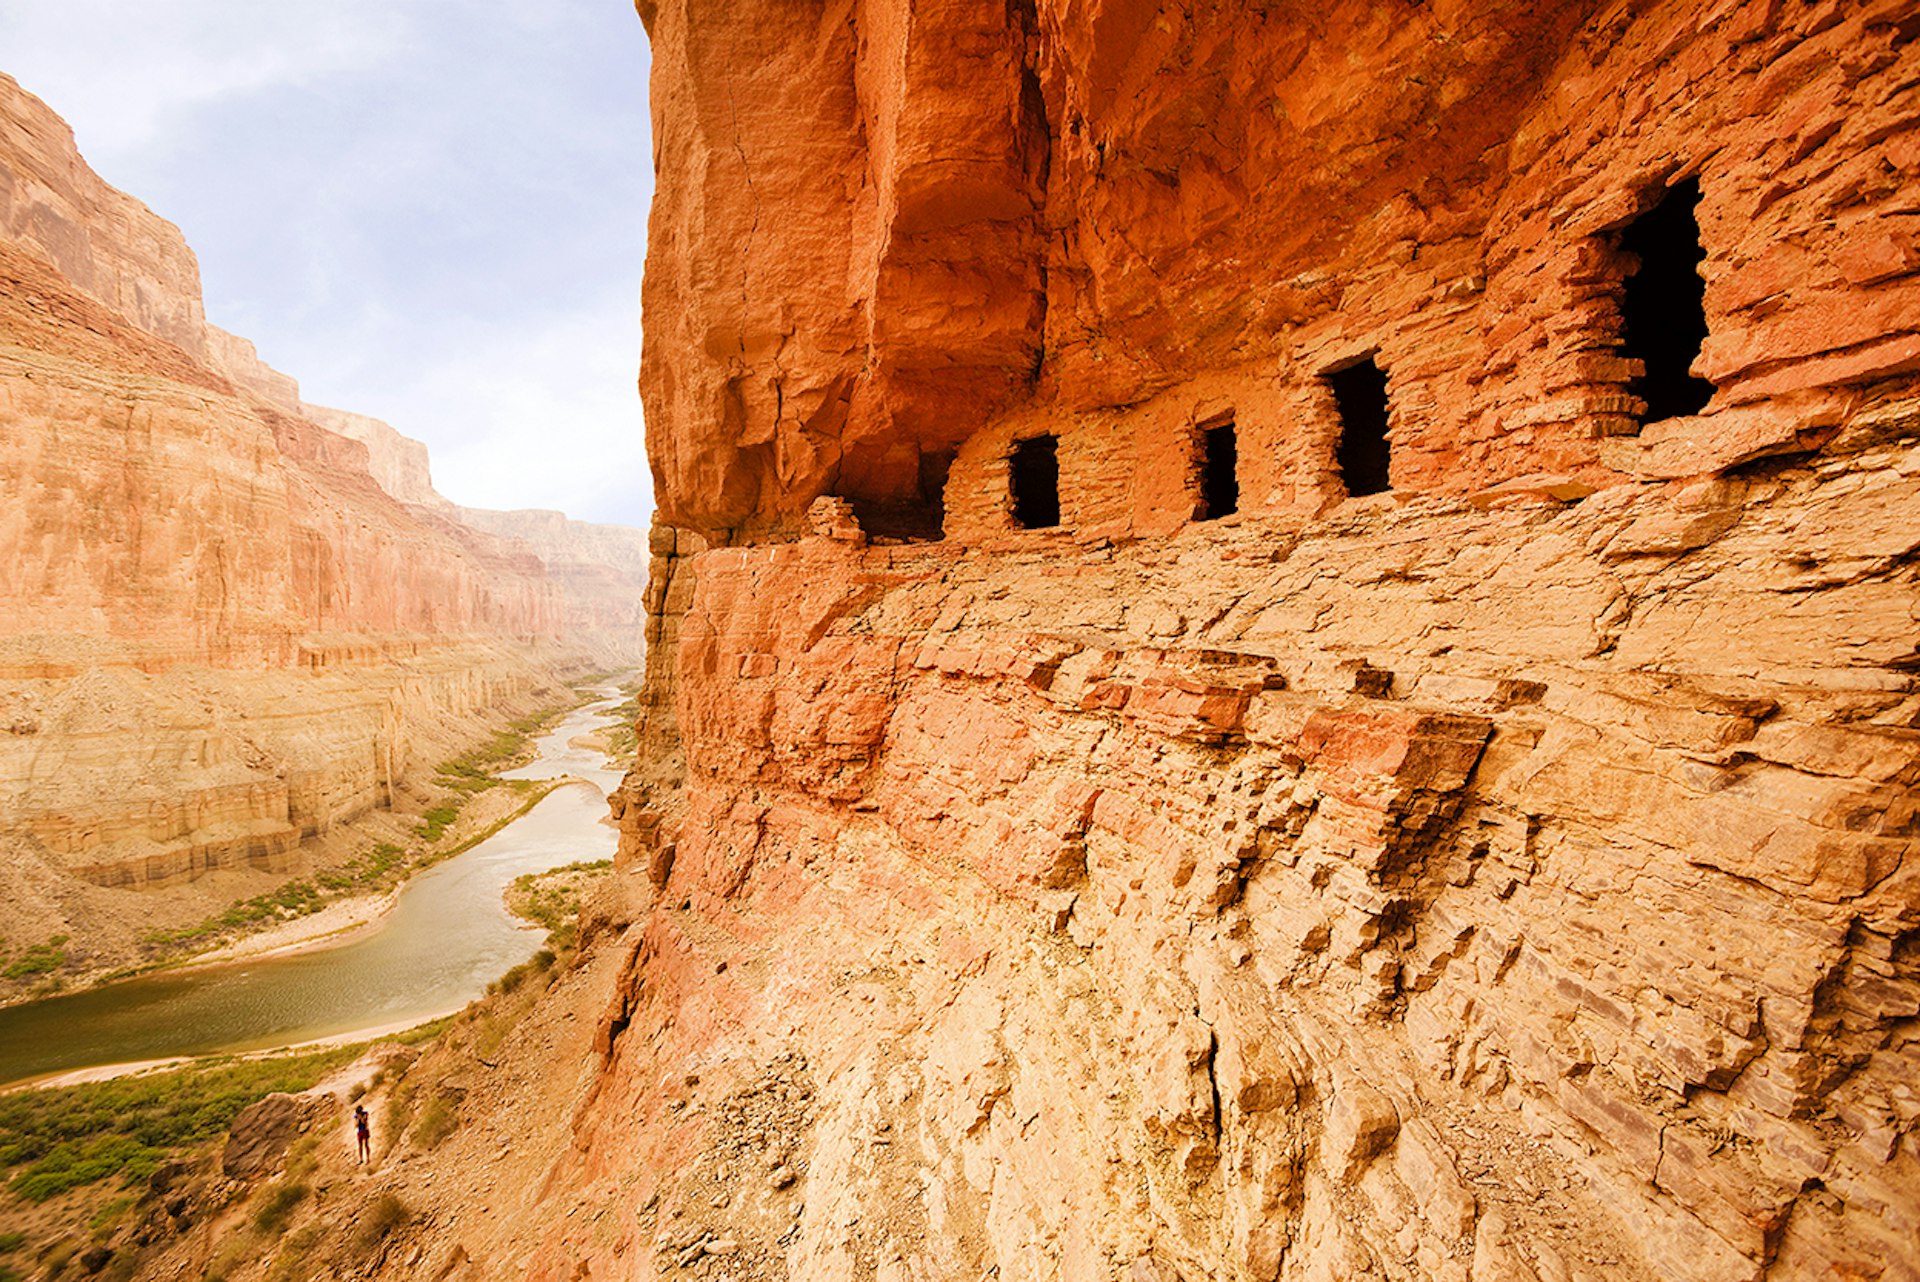 Anasazi cliff granaries on the Colorado River. Image by David Madison / The Image Bank / Getty